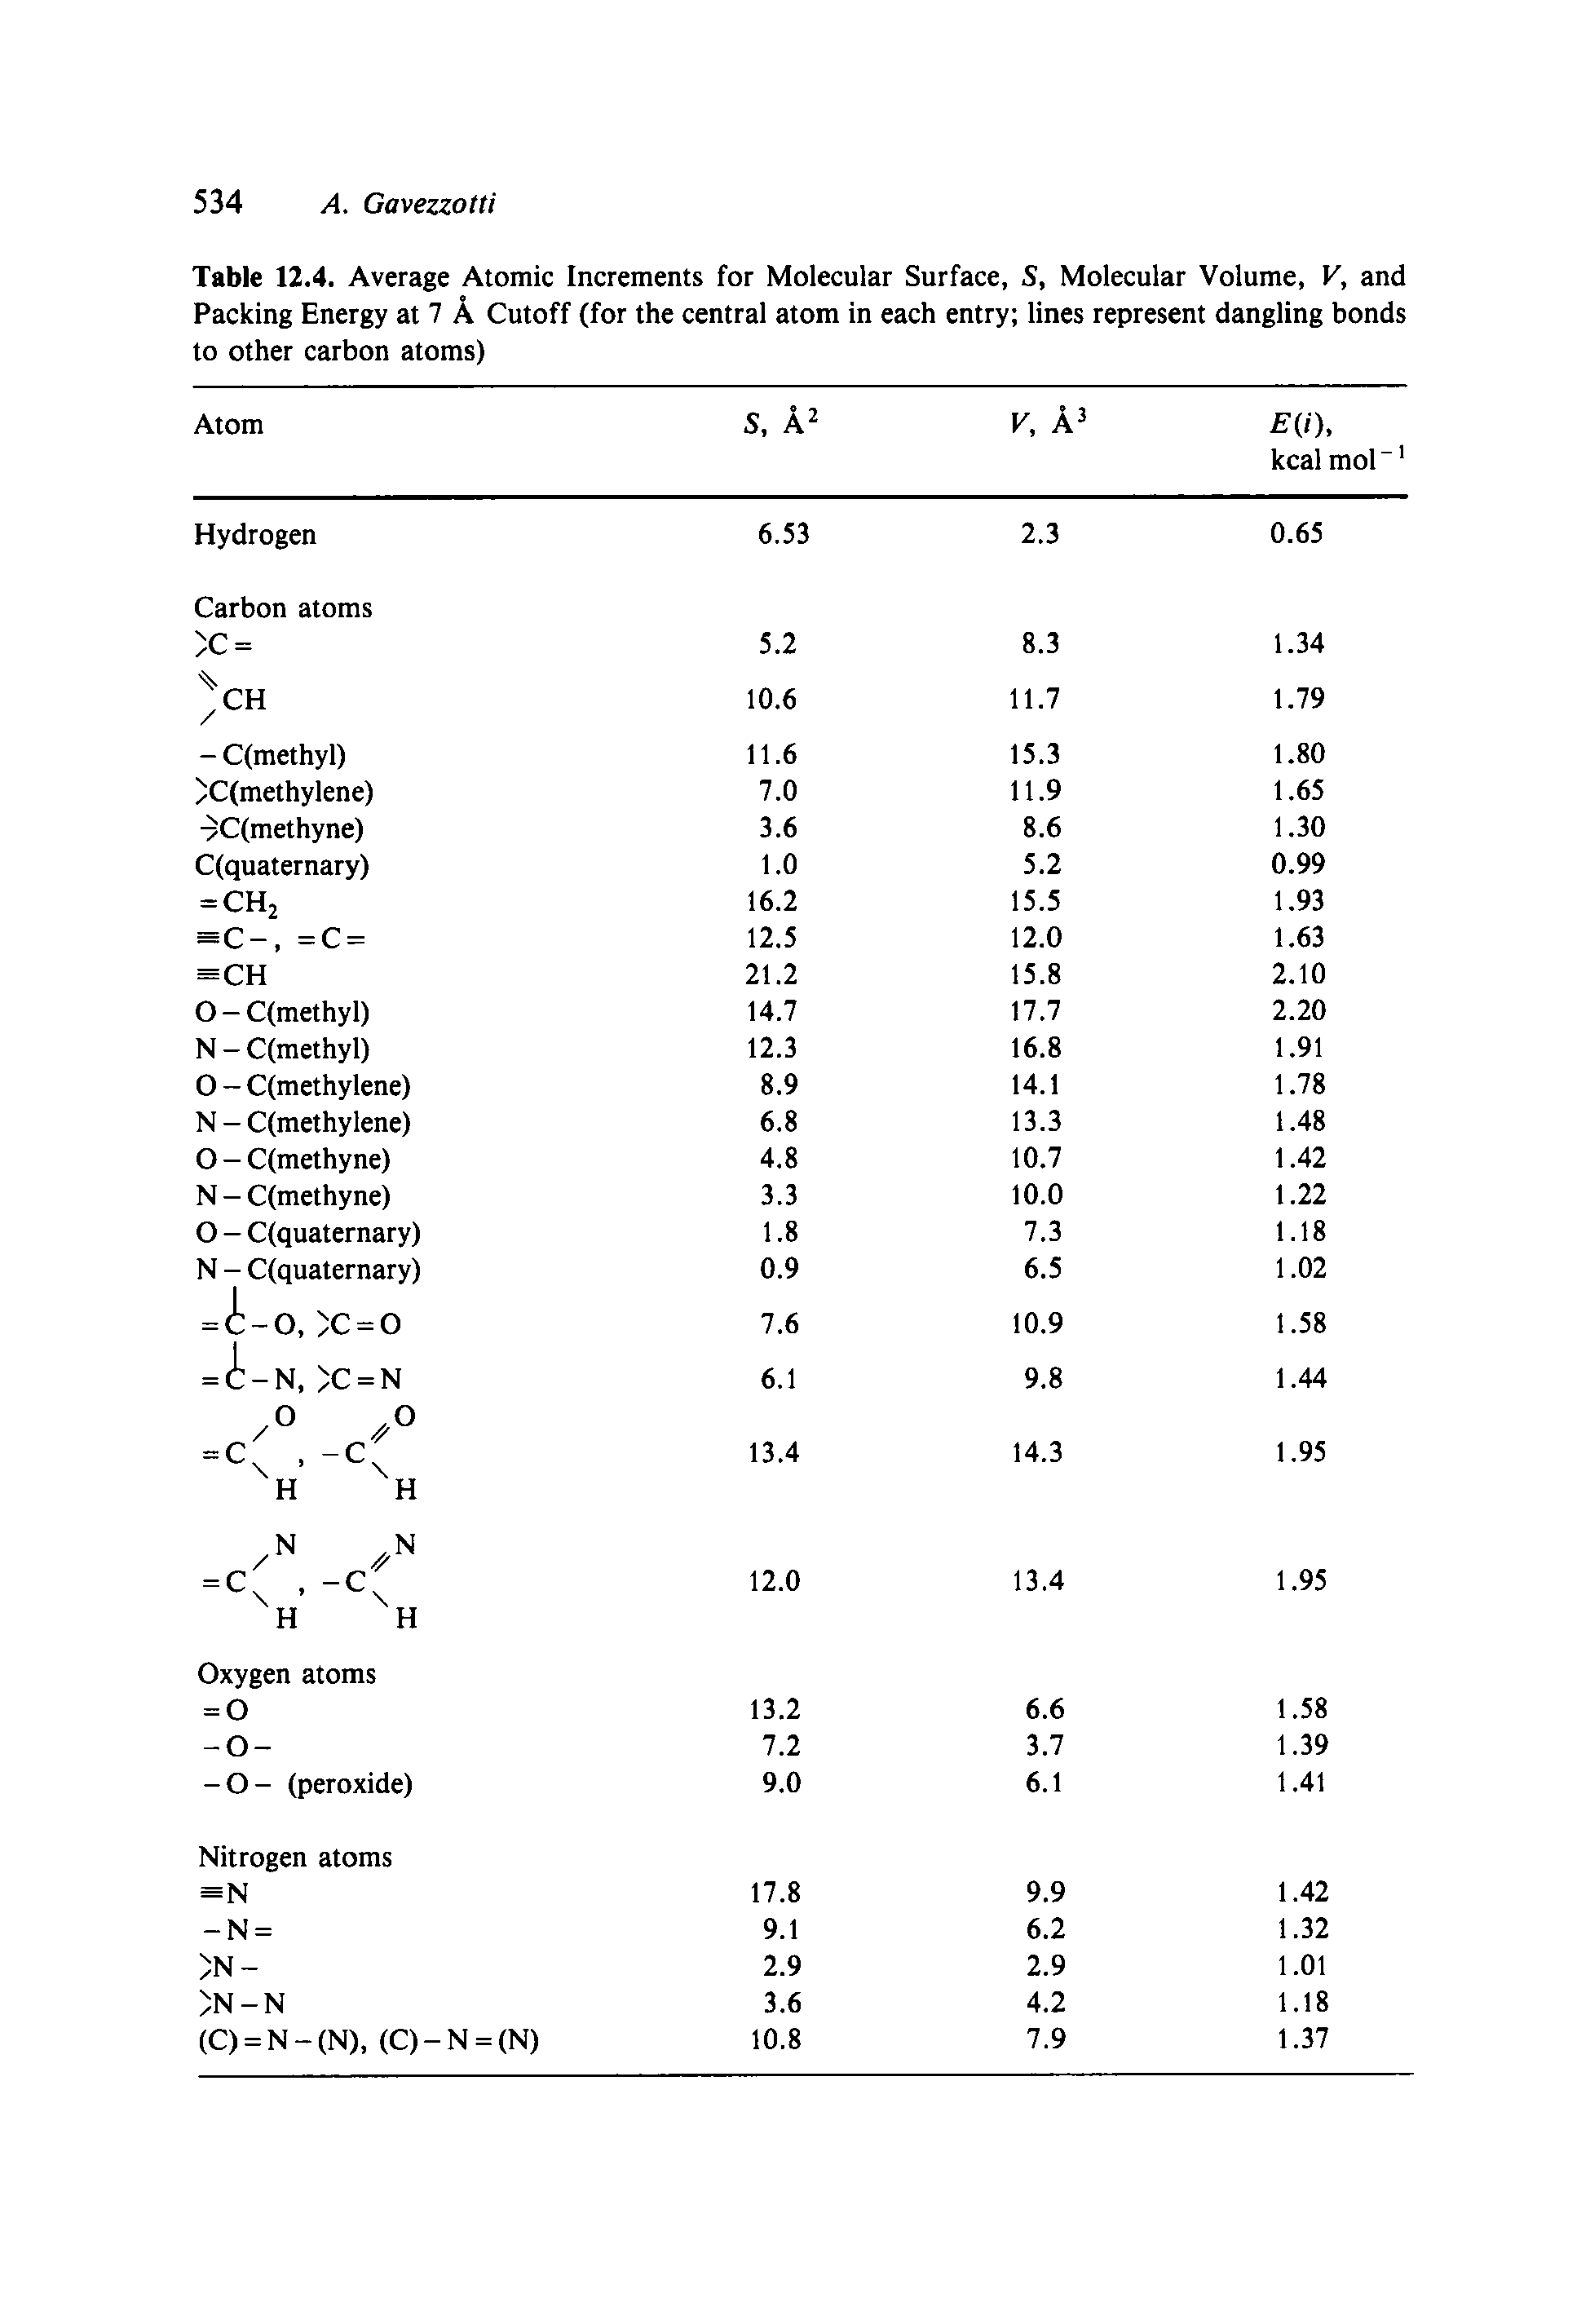 Table 12.4. Average Atomic Increments for Molecular Surface, S, Molecular Volume, V, and Packing Energy at 7 A Cutoff (for the central atom in each entry lines represent dangling bonds to other carbon atoms)...